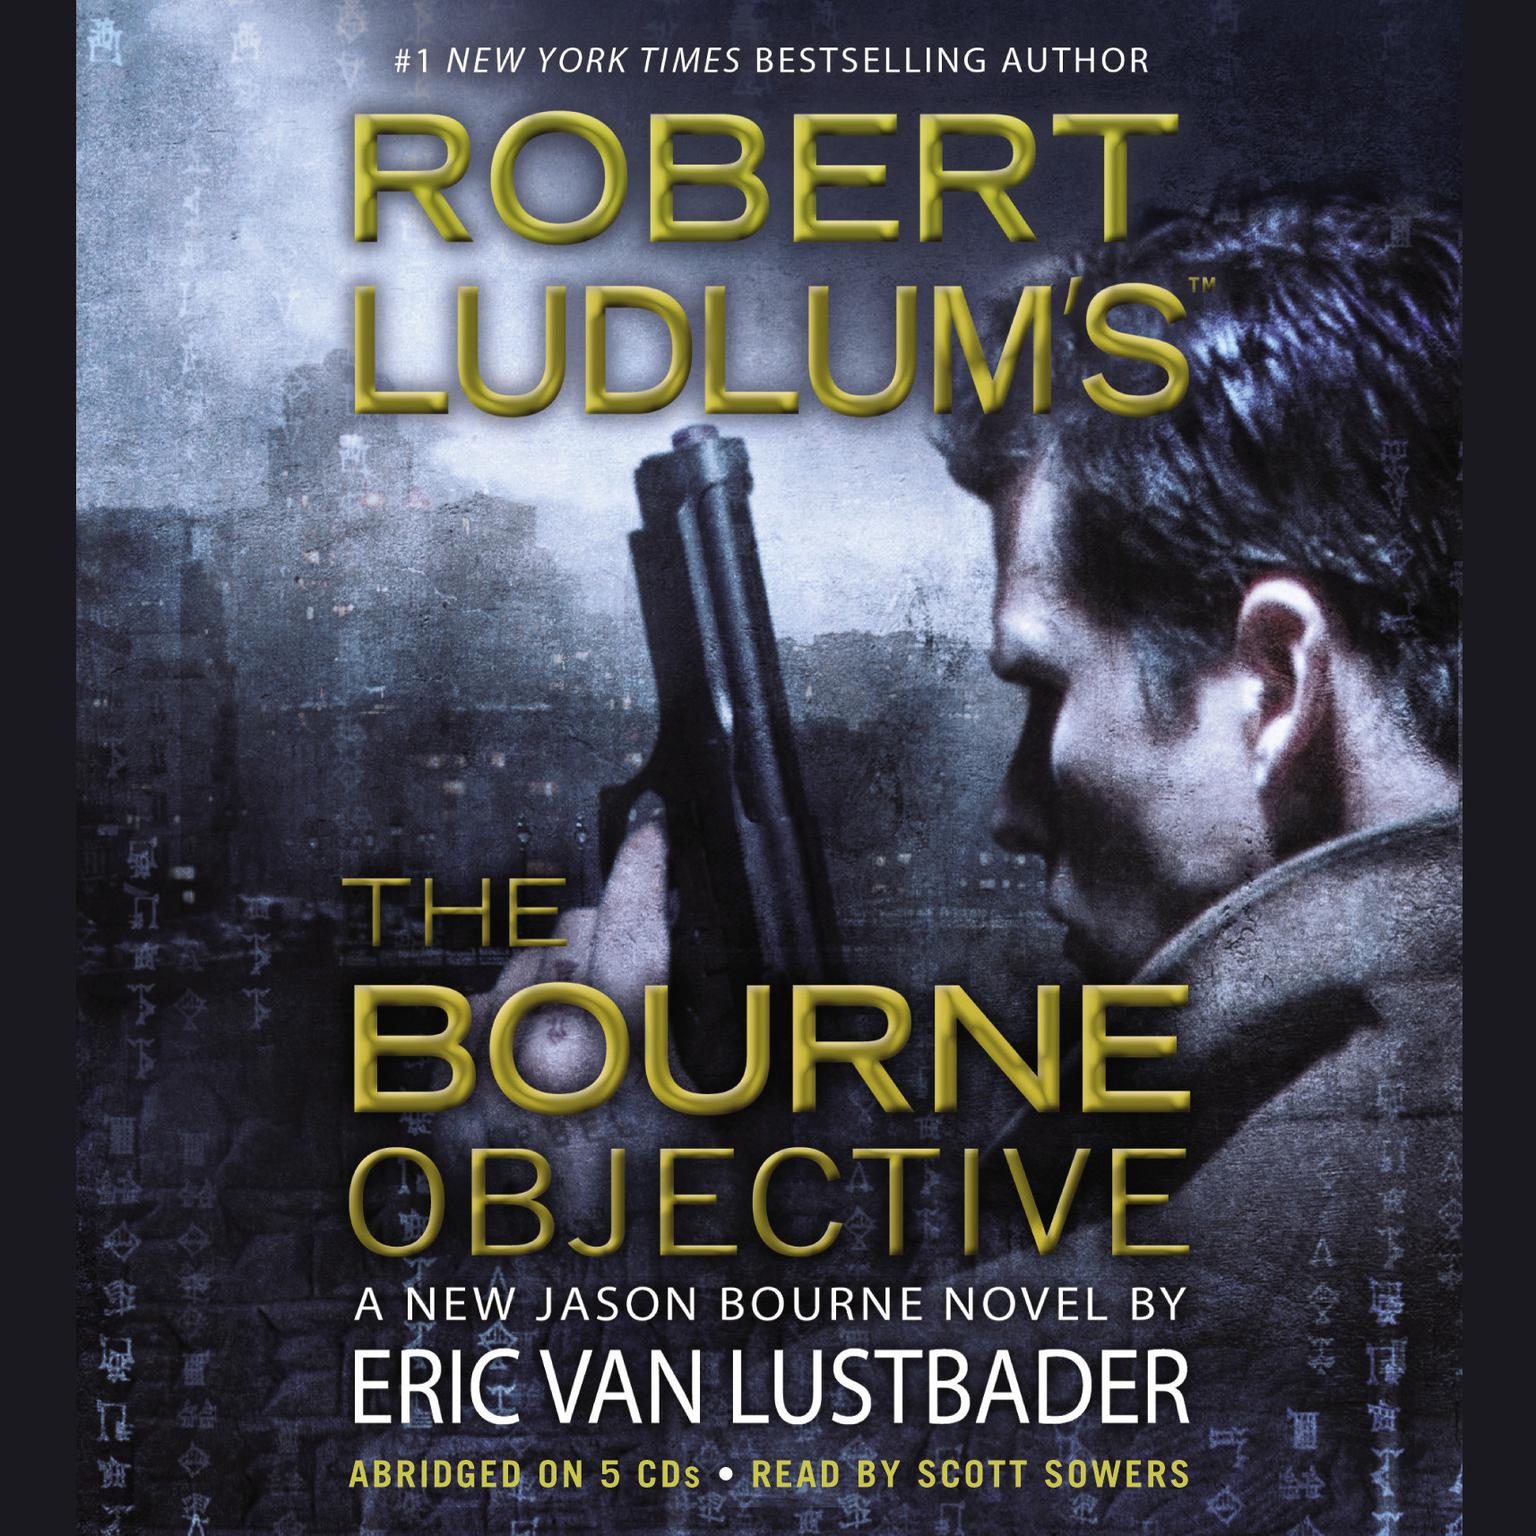 Robert Ludlums (TM) The Bourne Objective (Abridged) Audiobook, by Eric Van Lustbader